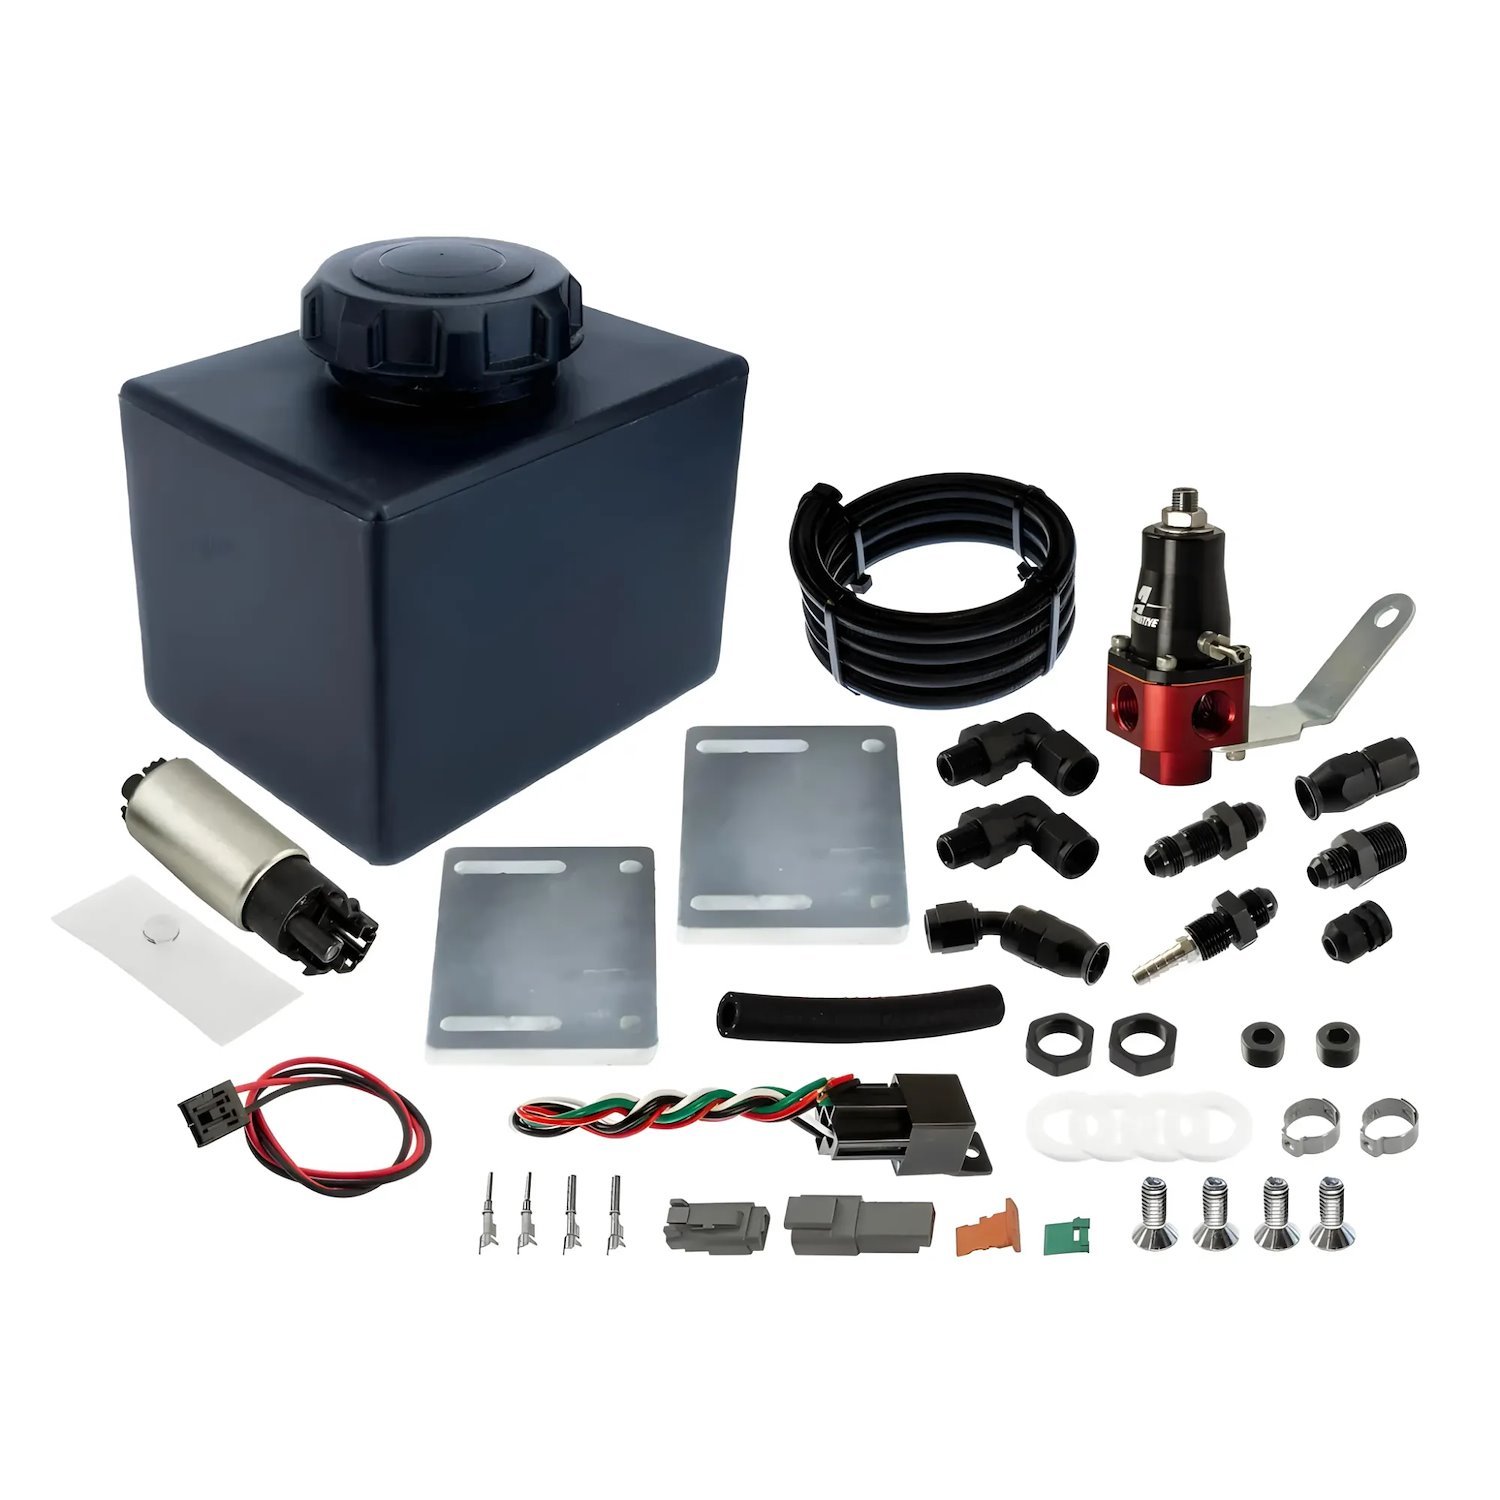 00-12051-DIY DIY Plastic Universal Battery Relocate Dedicated Fuel System, Requires Assembly, Gas/E85